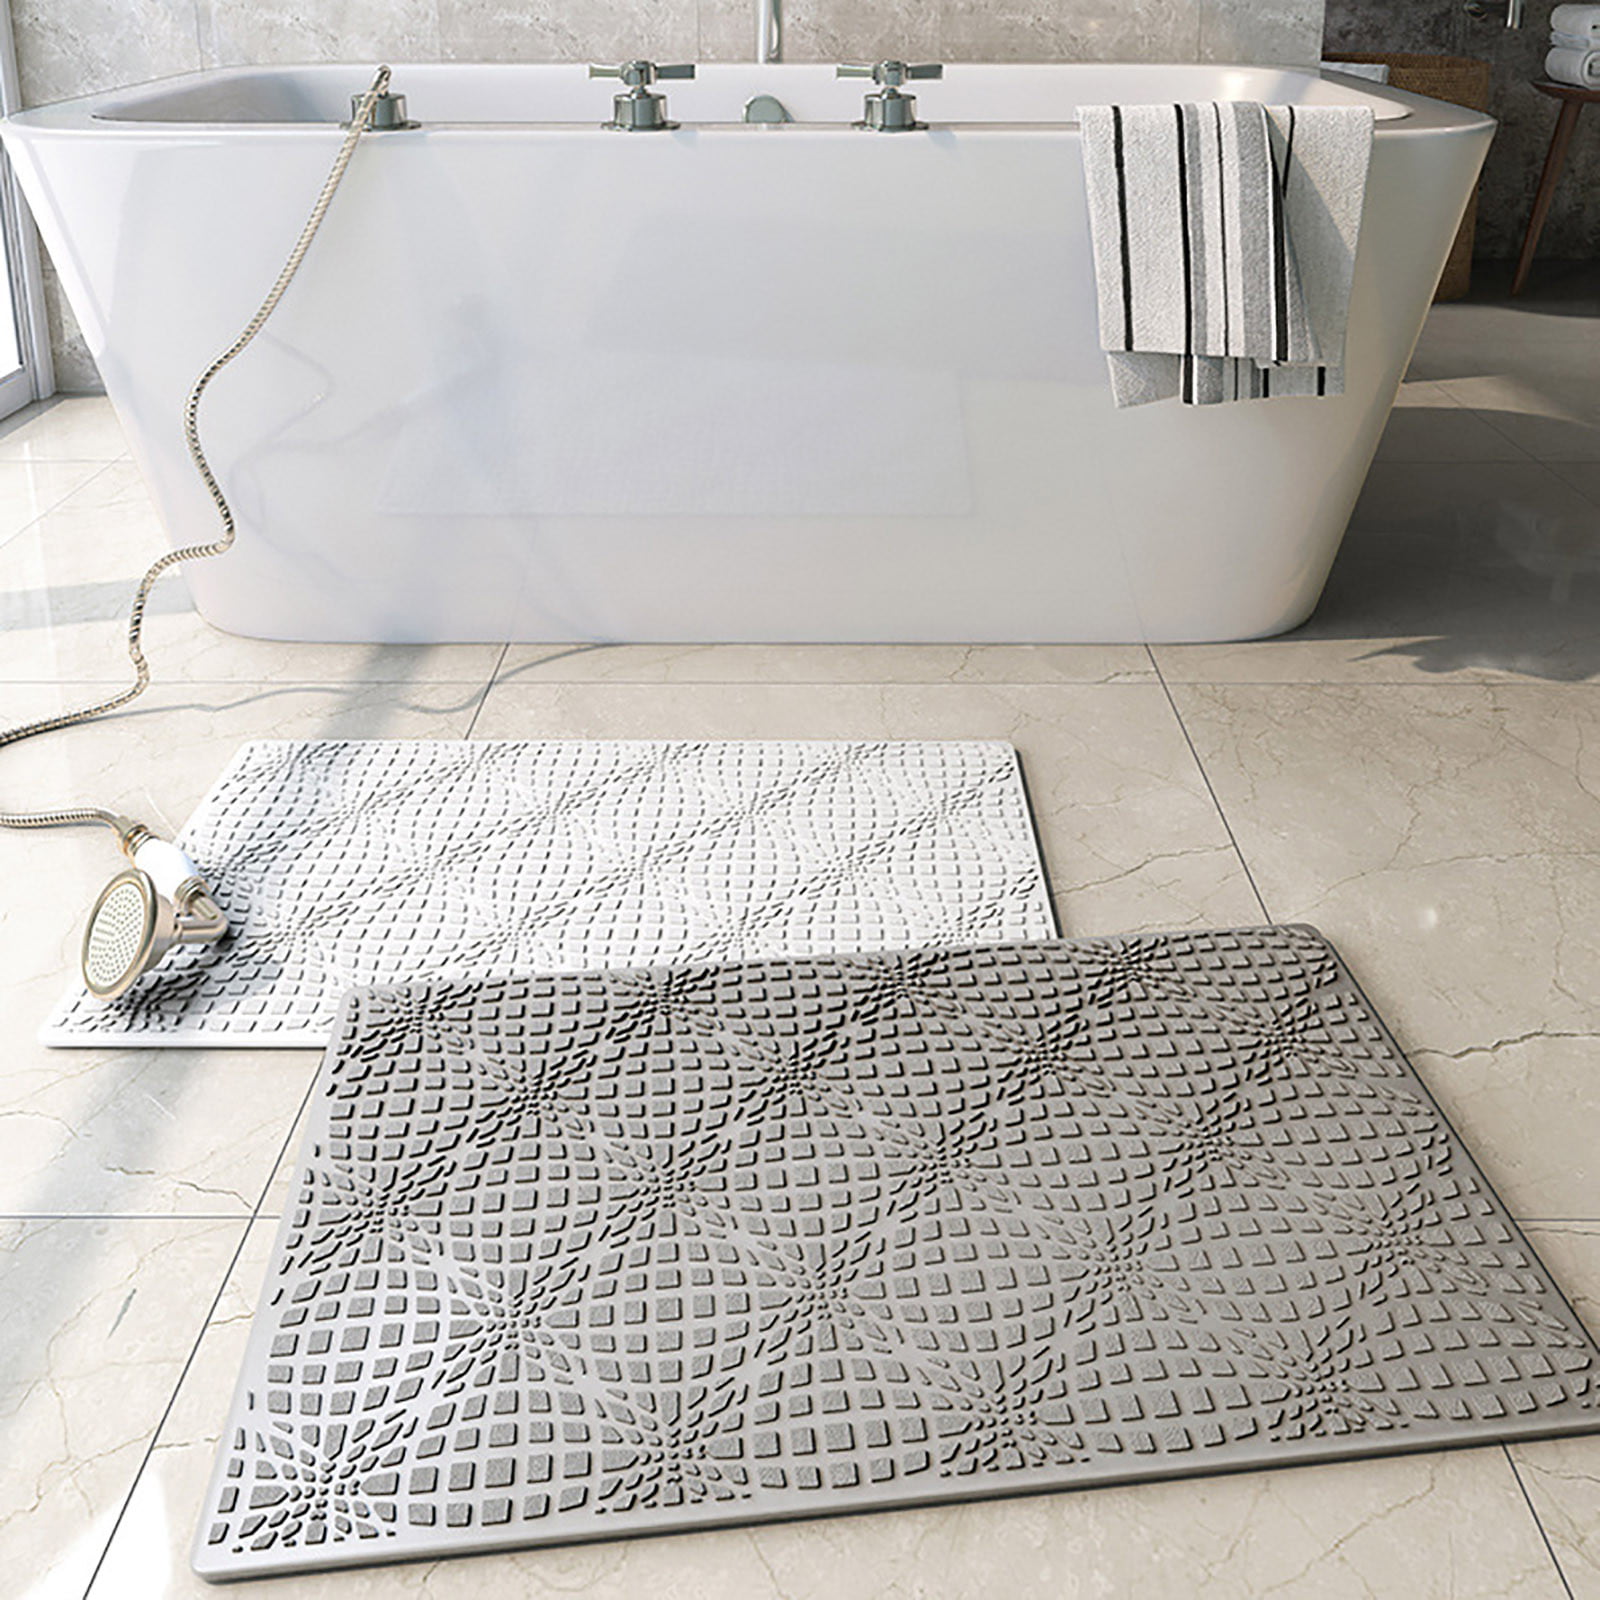 Travelwant 12Packs Solutions Square Shower Mat | Extra Large Non-Slip Stall Mat for Elderly & Kids Bathroom | Drain Holes, Strong Suction Cups